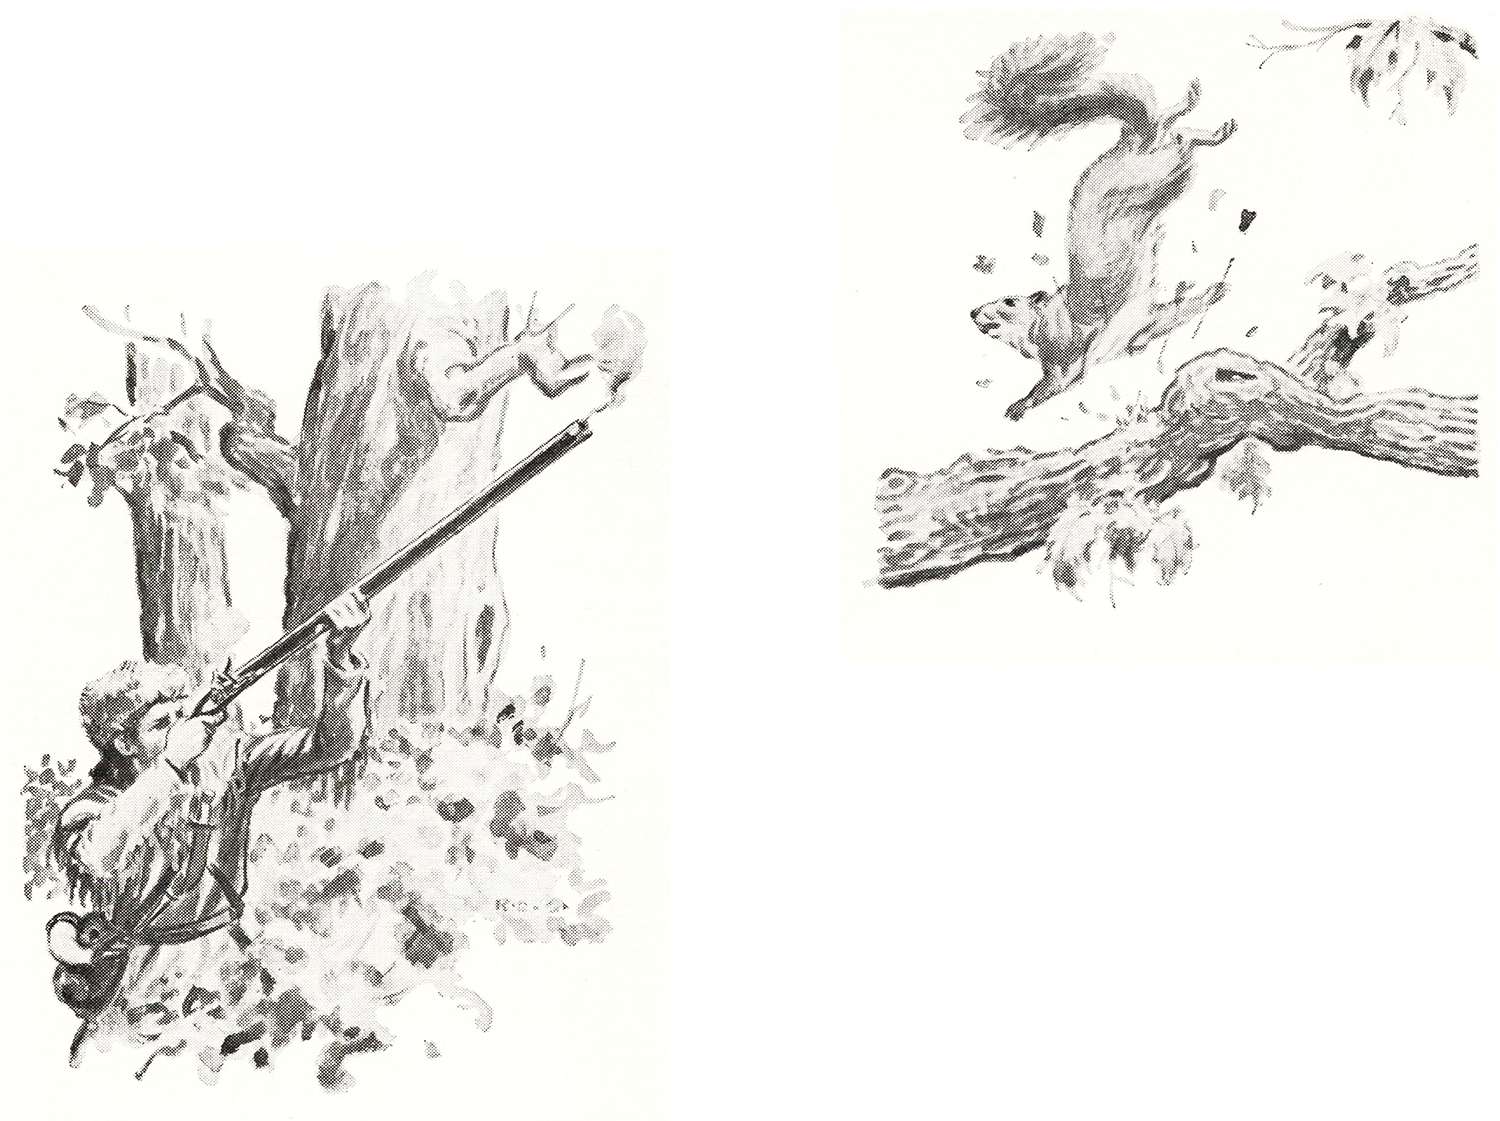 B&W illustrations of hunter shooting at squirrel on branch